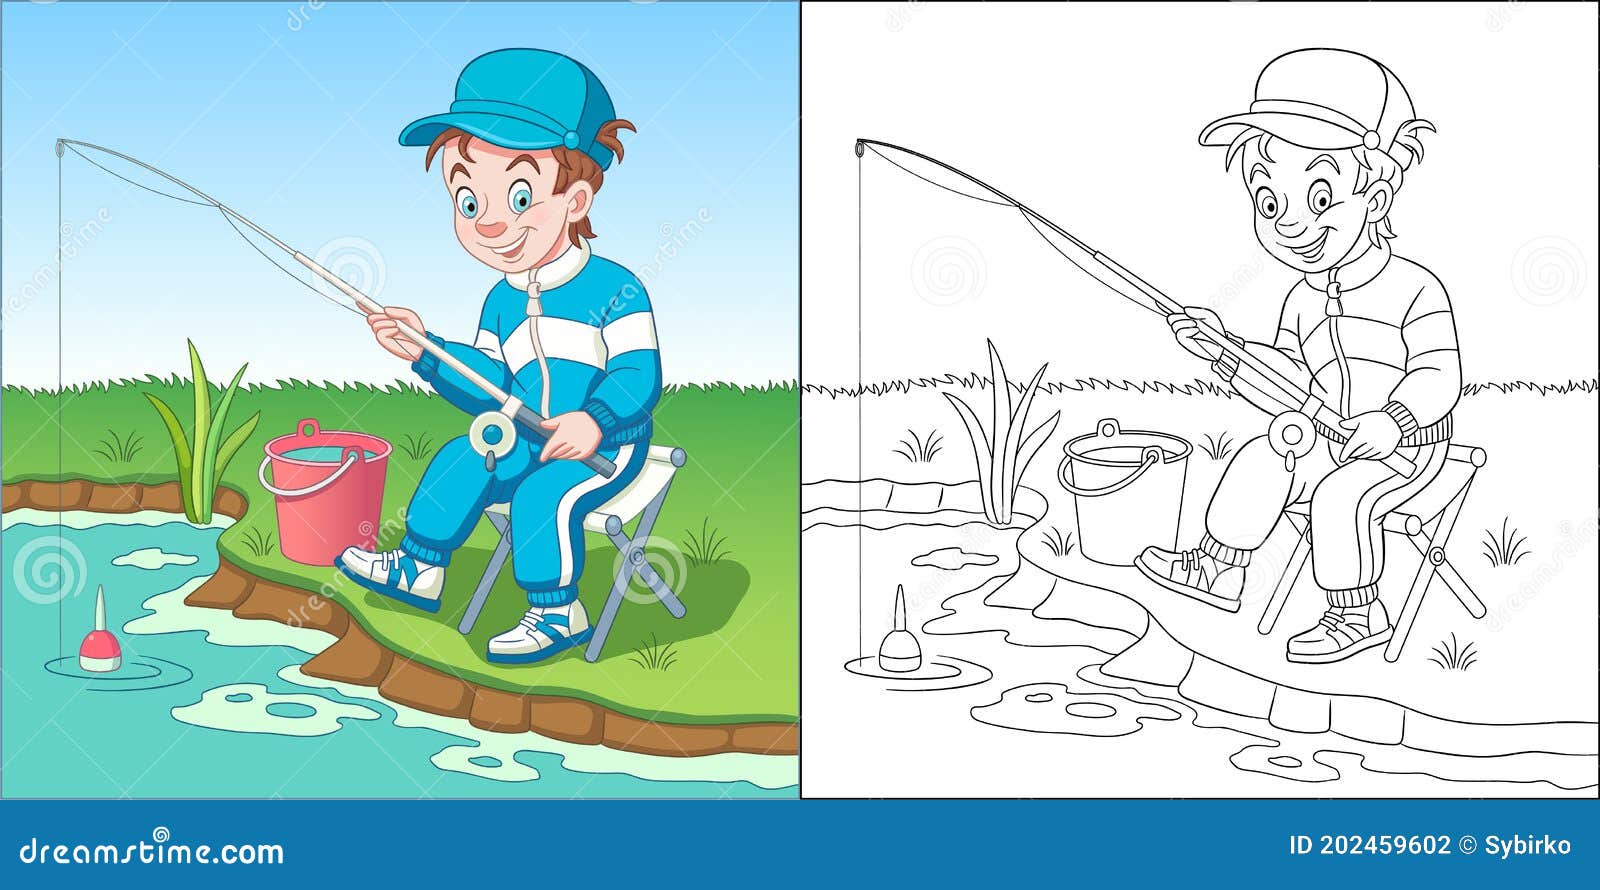 Coloring Page with Boy Fishing Stock Vector - Illustration of